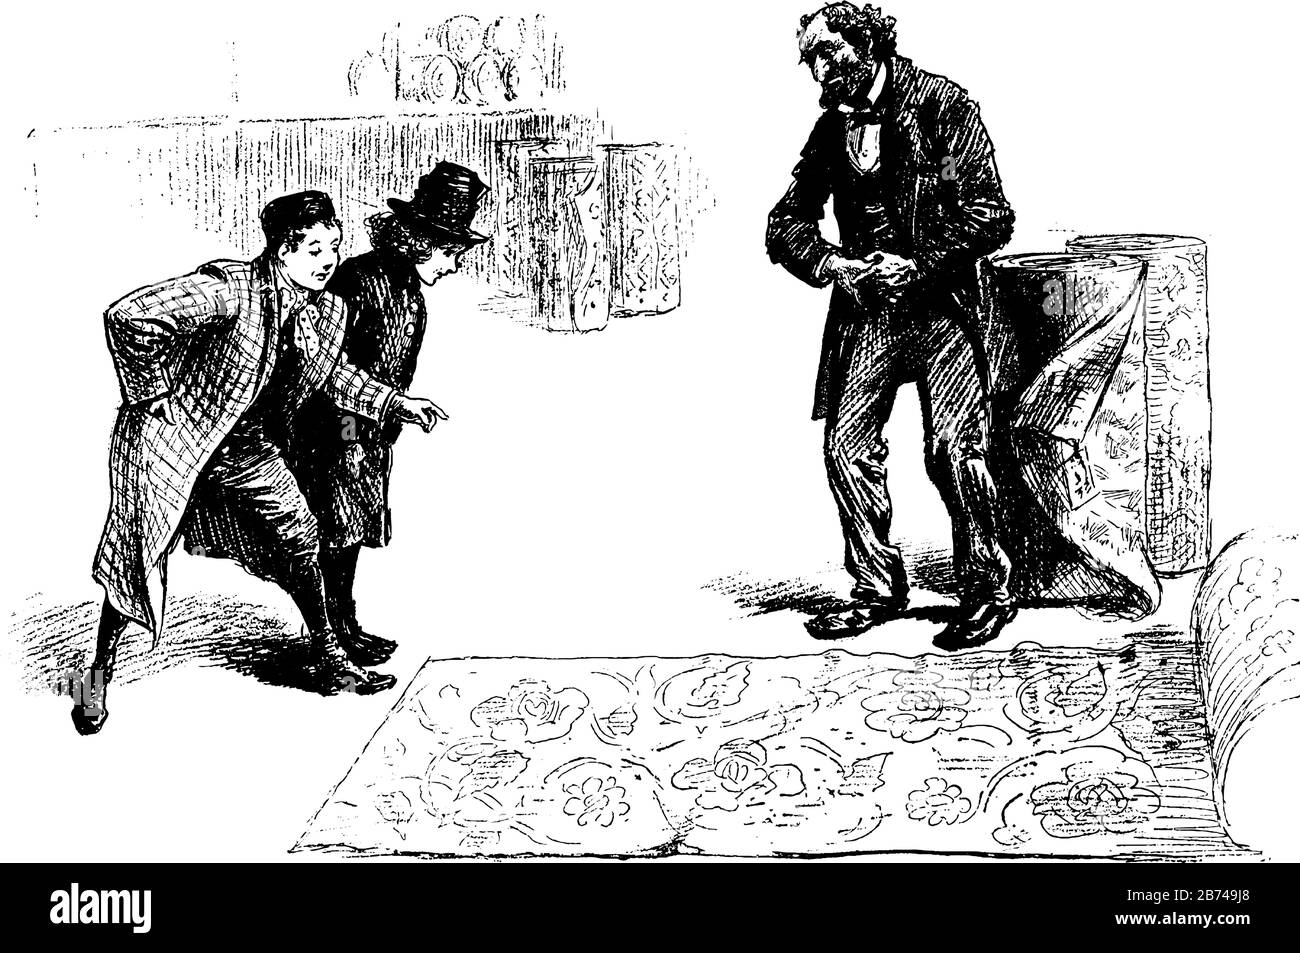 Prince Tommy, this scene shows a man with rolls of printed cloths and two men looking at cloth which spread on ground, vintage line drawing or engravi Stock Vector